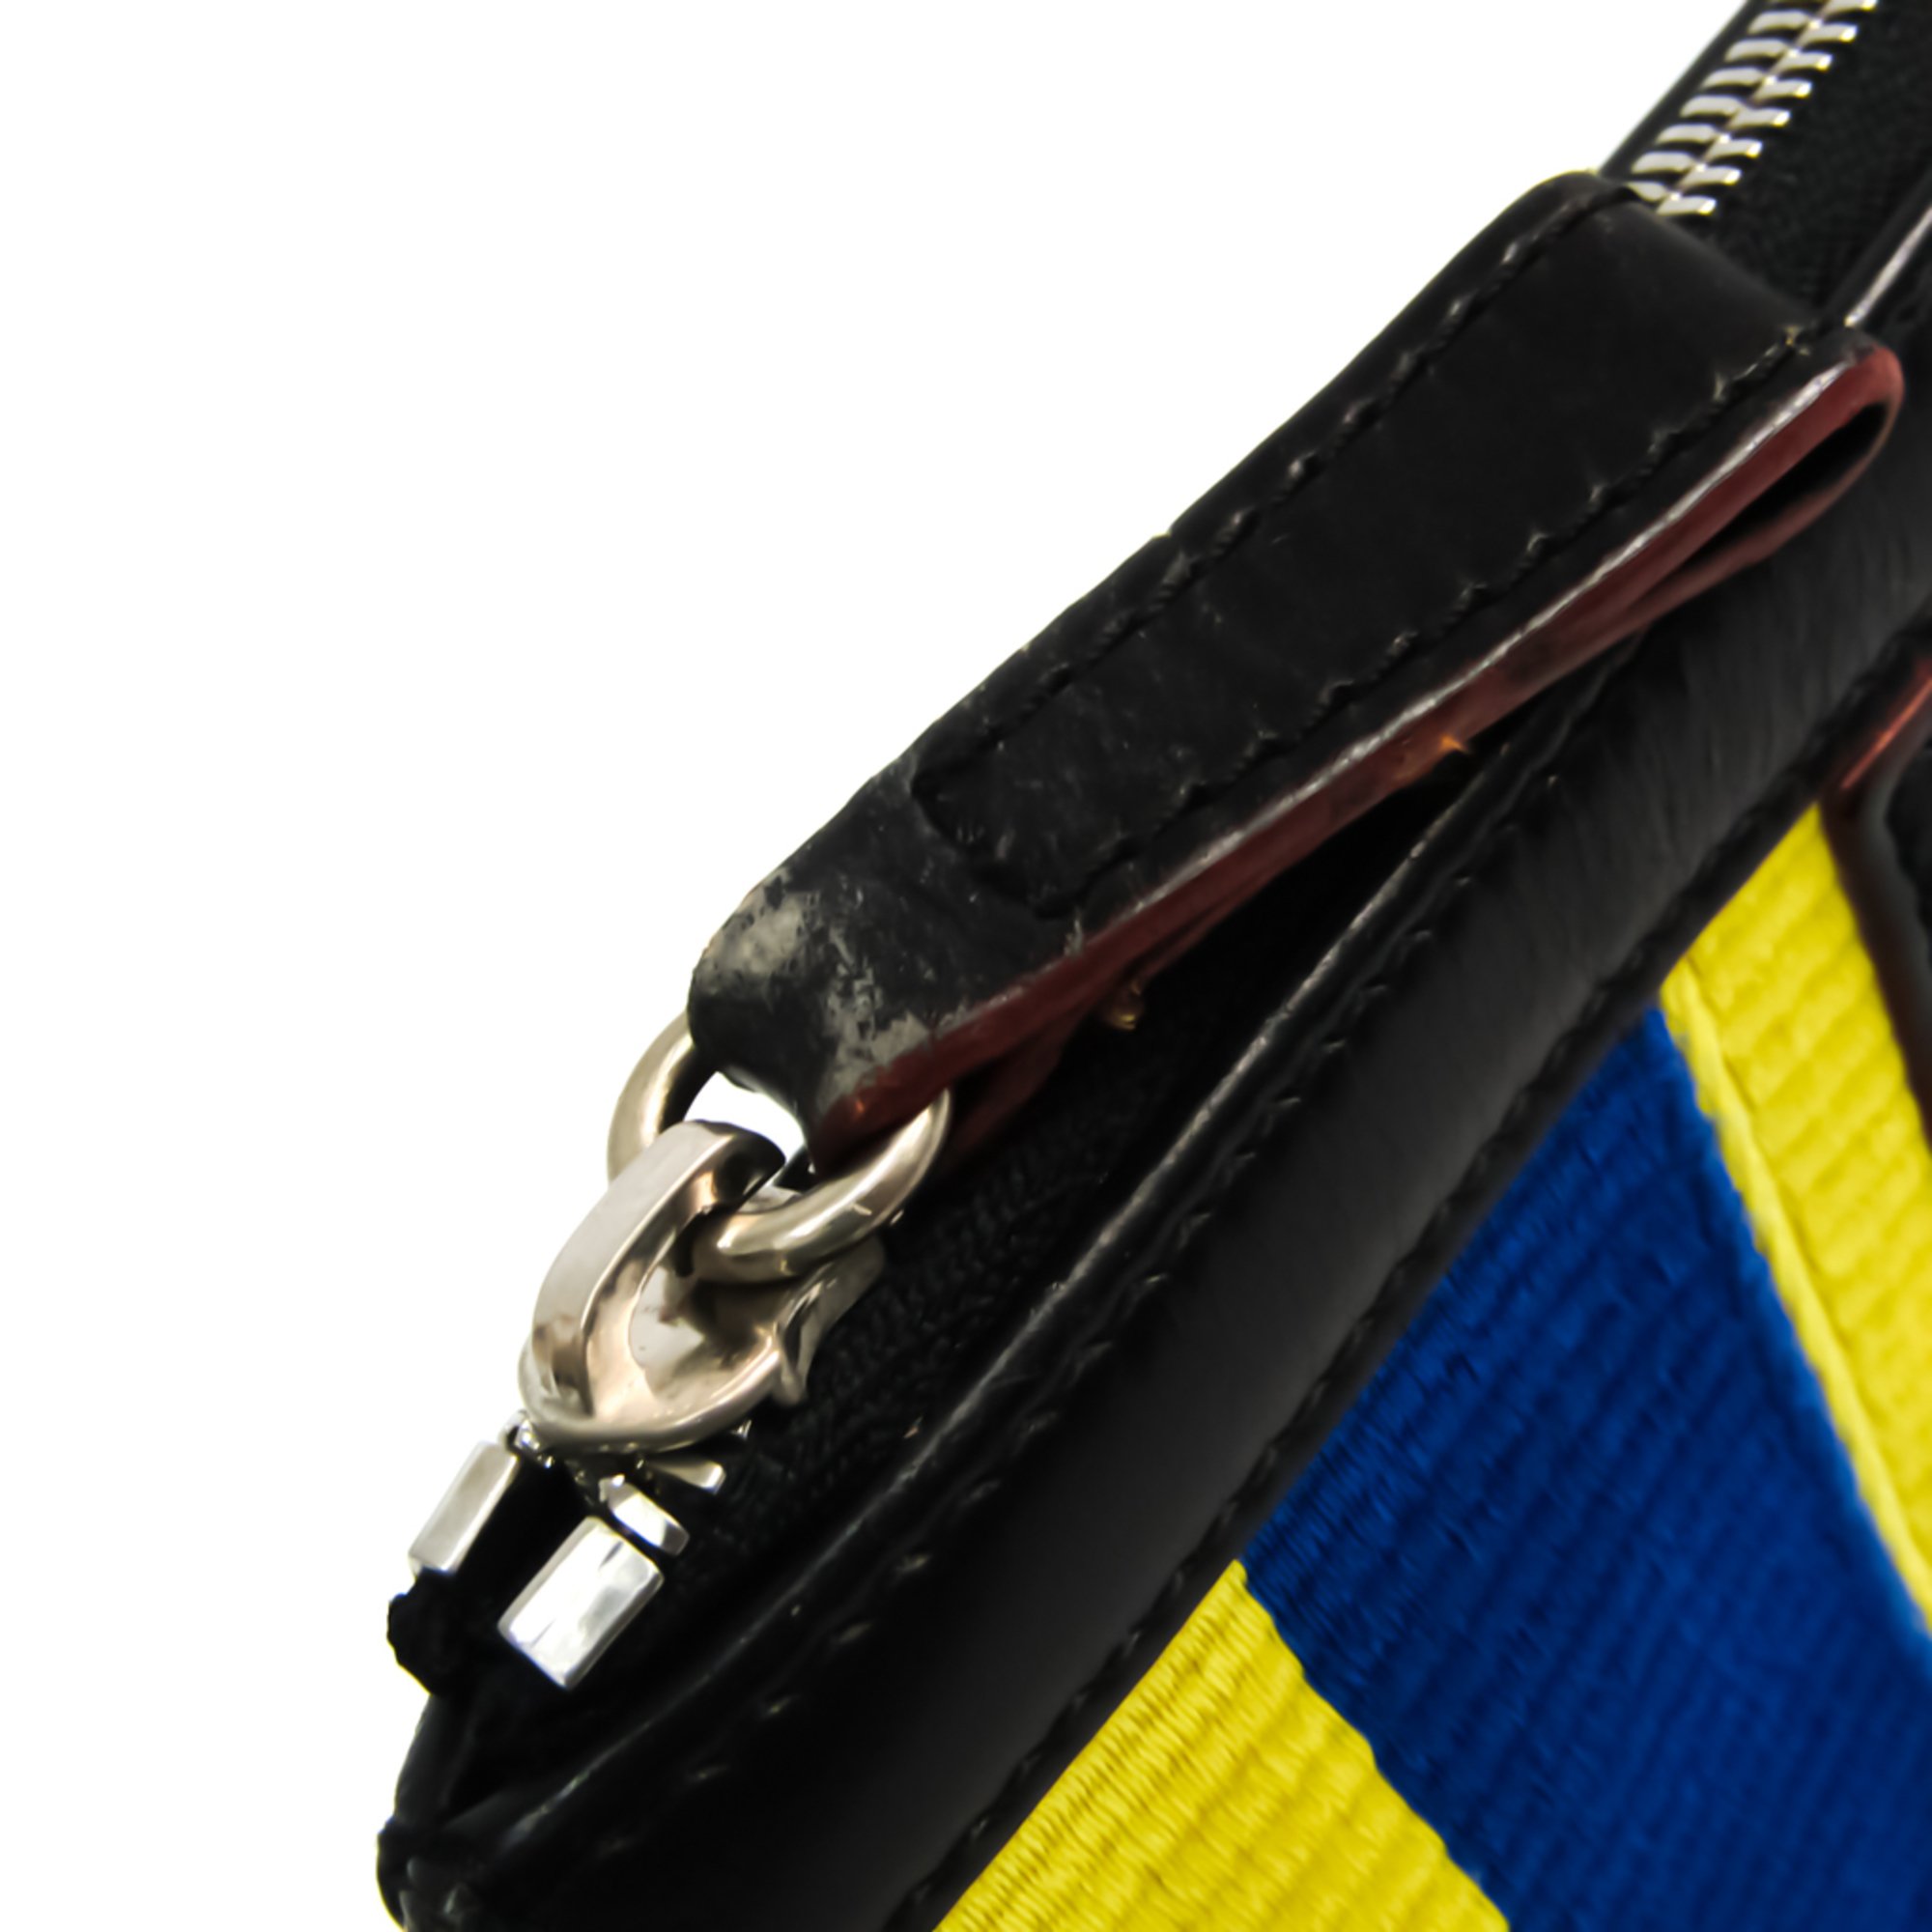 Loewe Unisex Leather,Cotton Pouch Black,Blue,Yellow